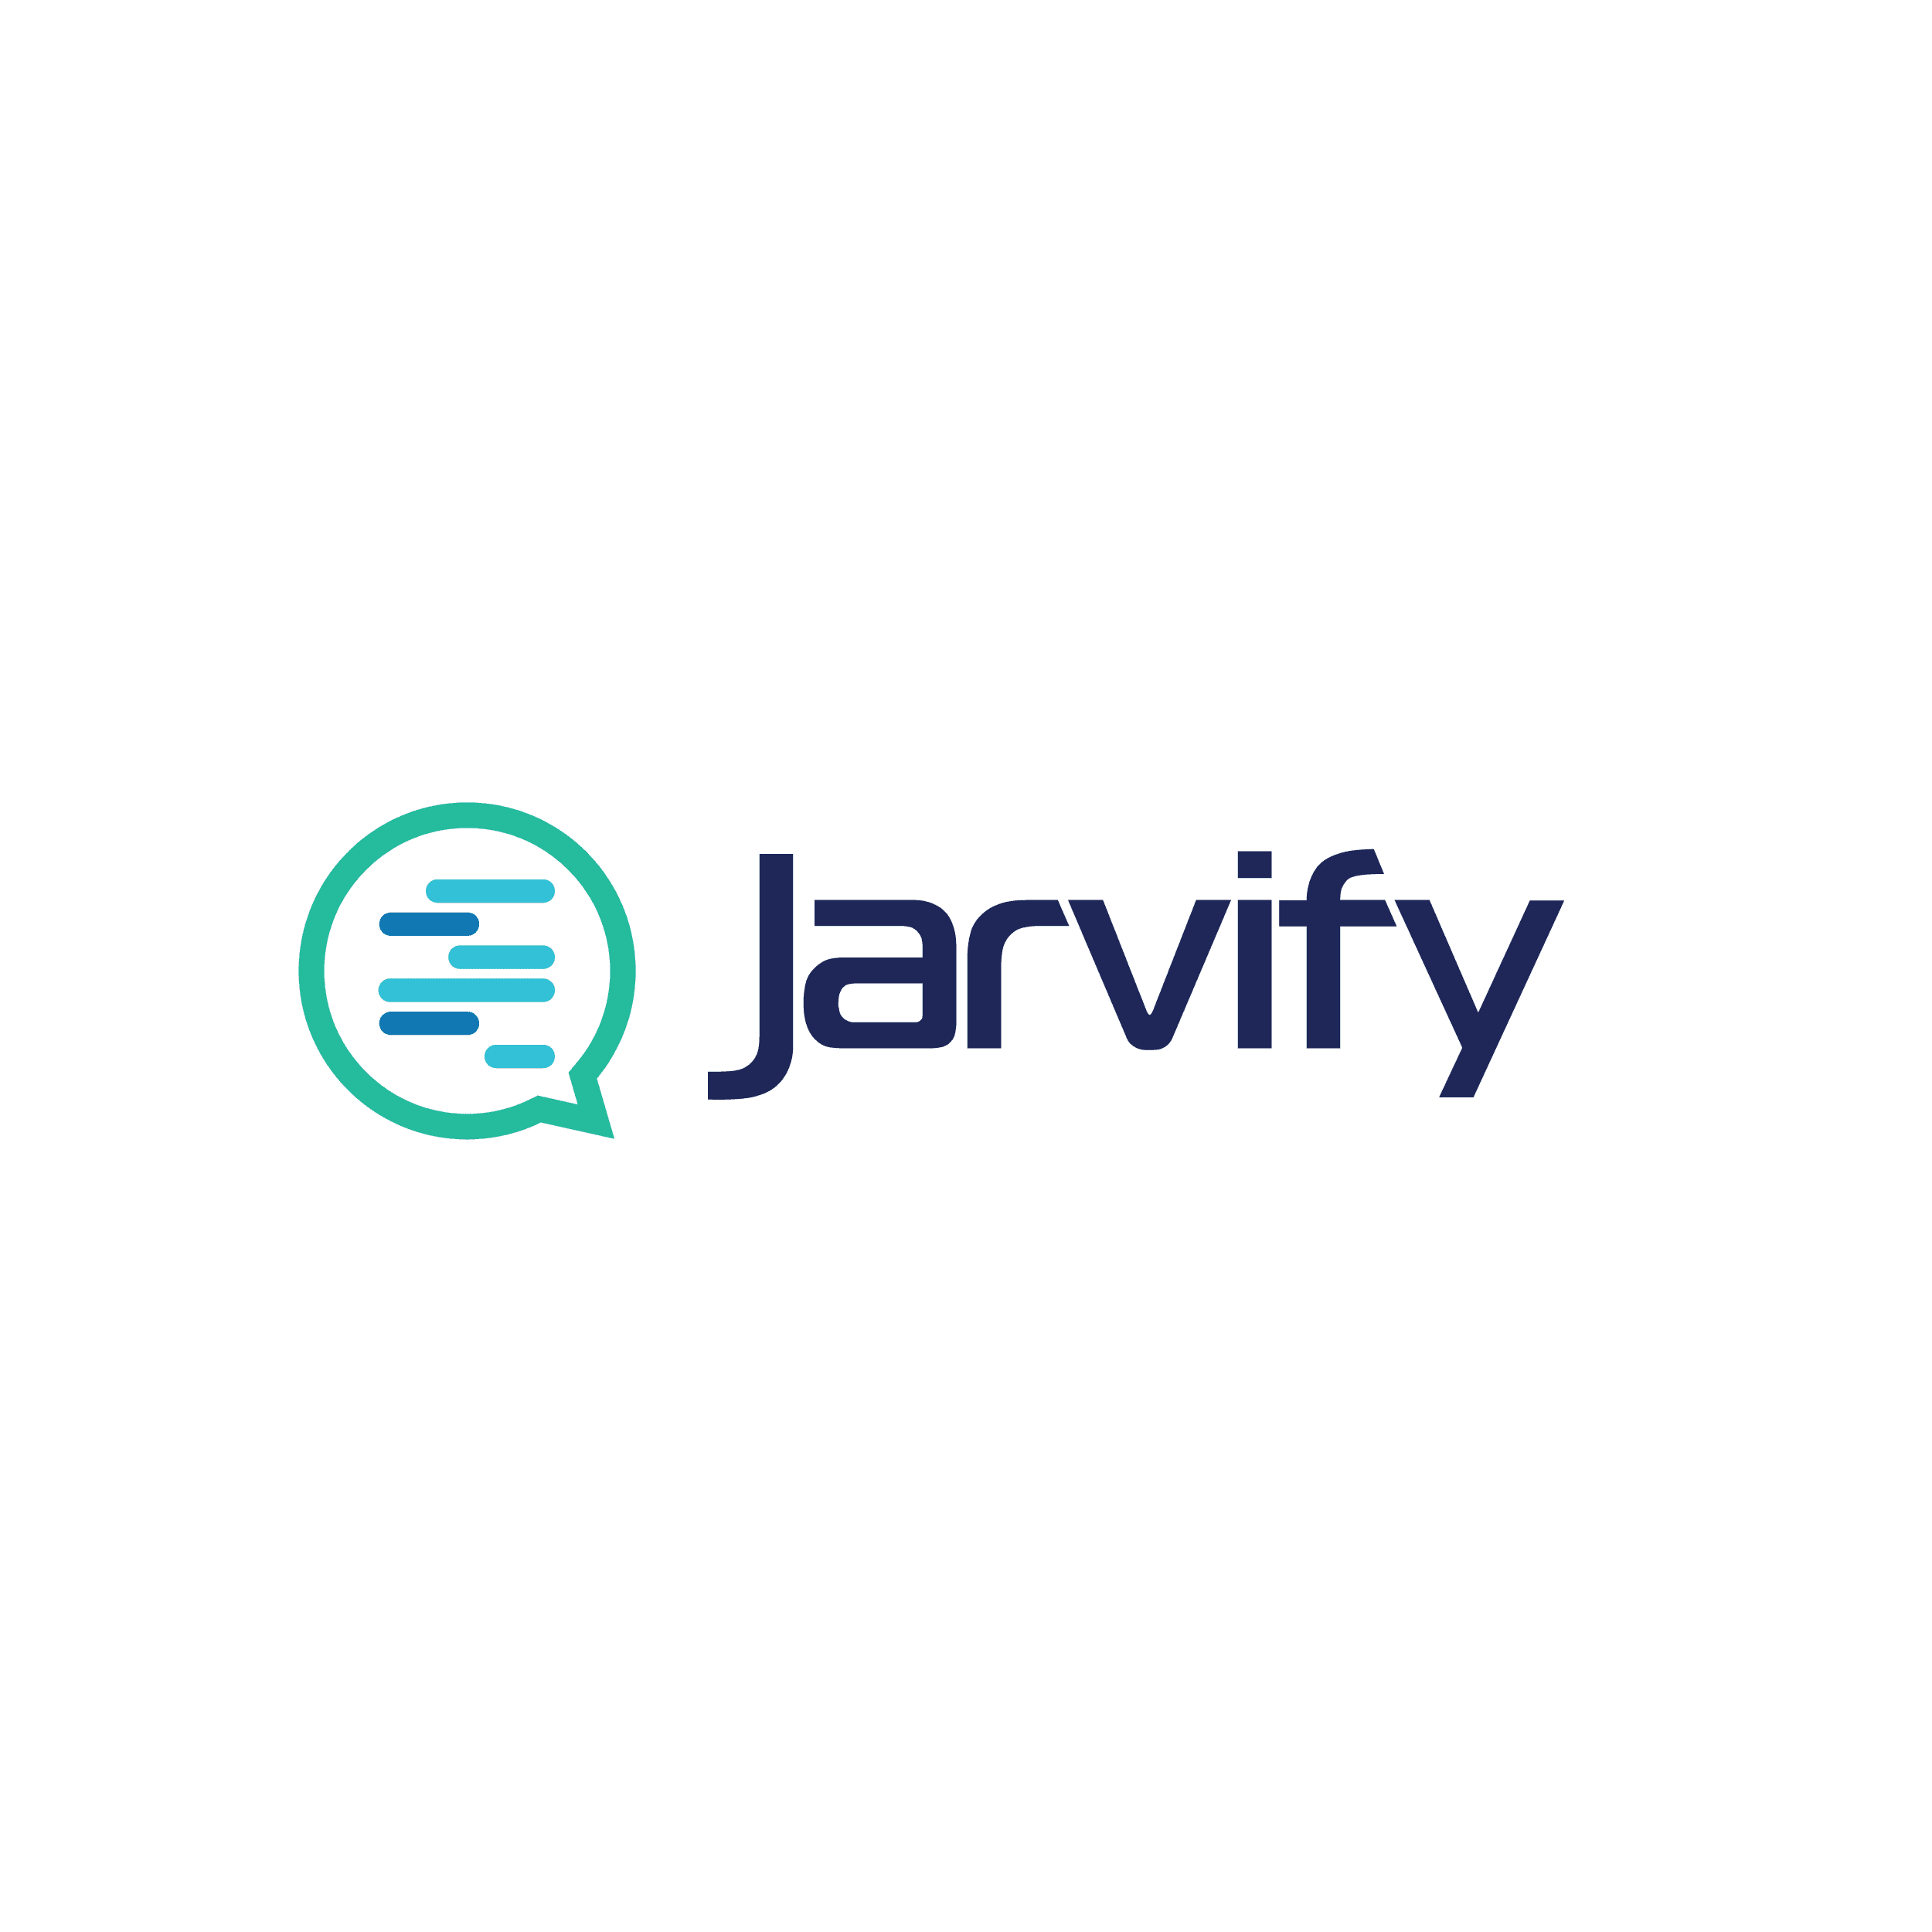 Product Jarvify | The platform image